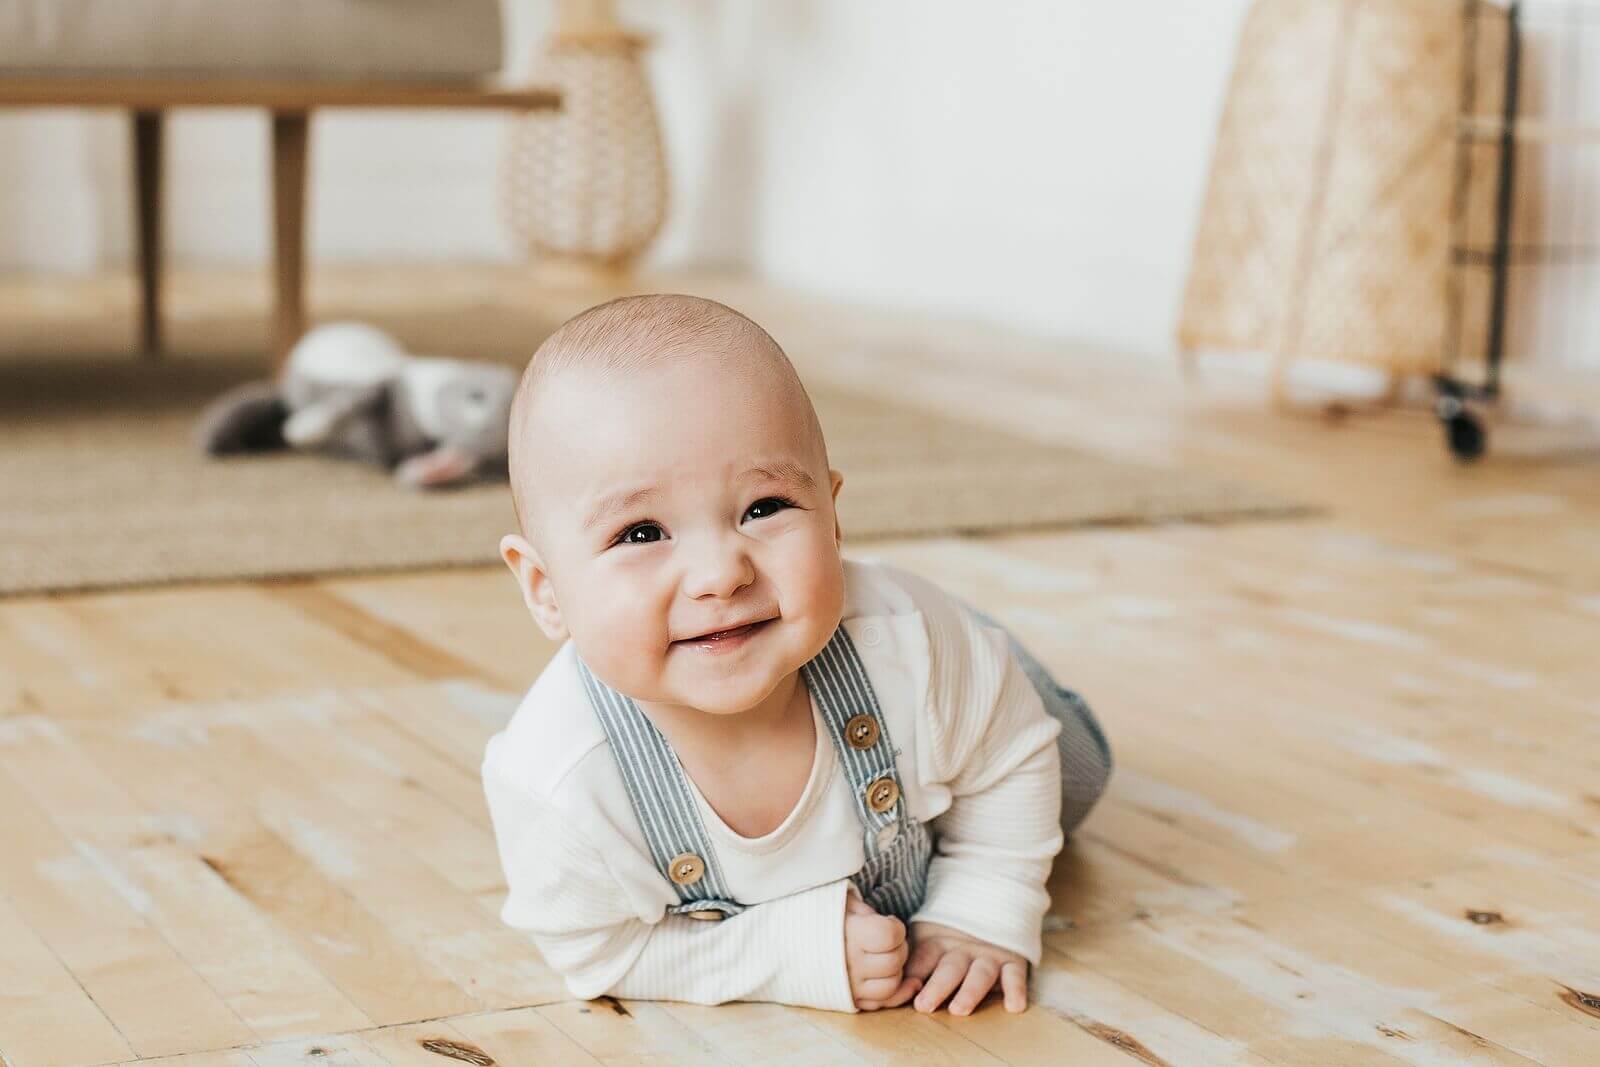 A baby lying face down on the floor and smiling.